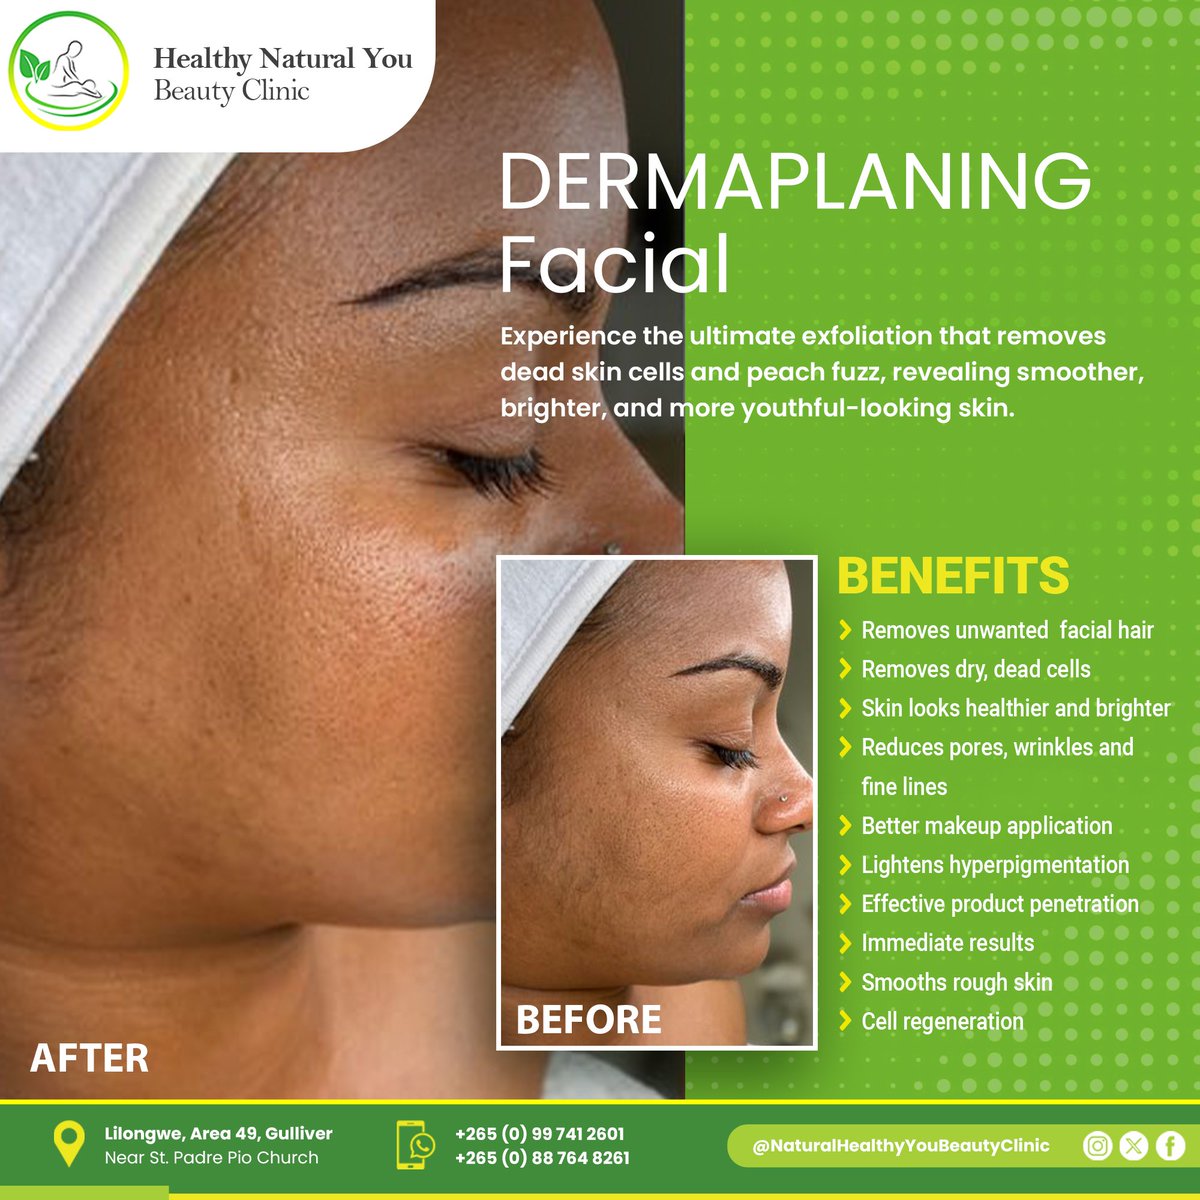 Unlock Your Skin's Radiance ✨ with Dermaplaning!✨ Experience the ultimate exfoliation that removes unwanted facial hair, dead skin cells and peach fuzz, revealing smoother, brighter, and more youthful-looking skin. 💆‍♀️ Book your session now!